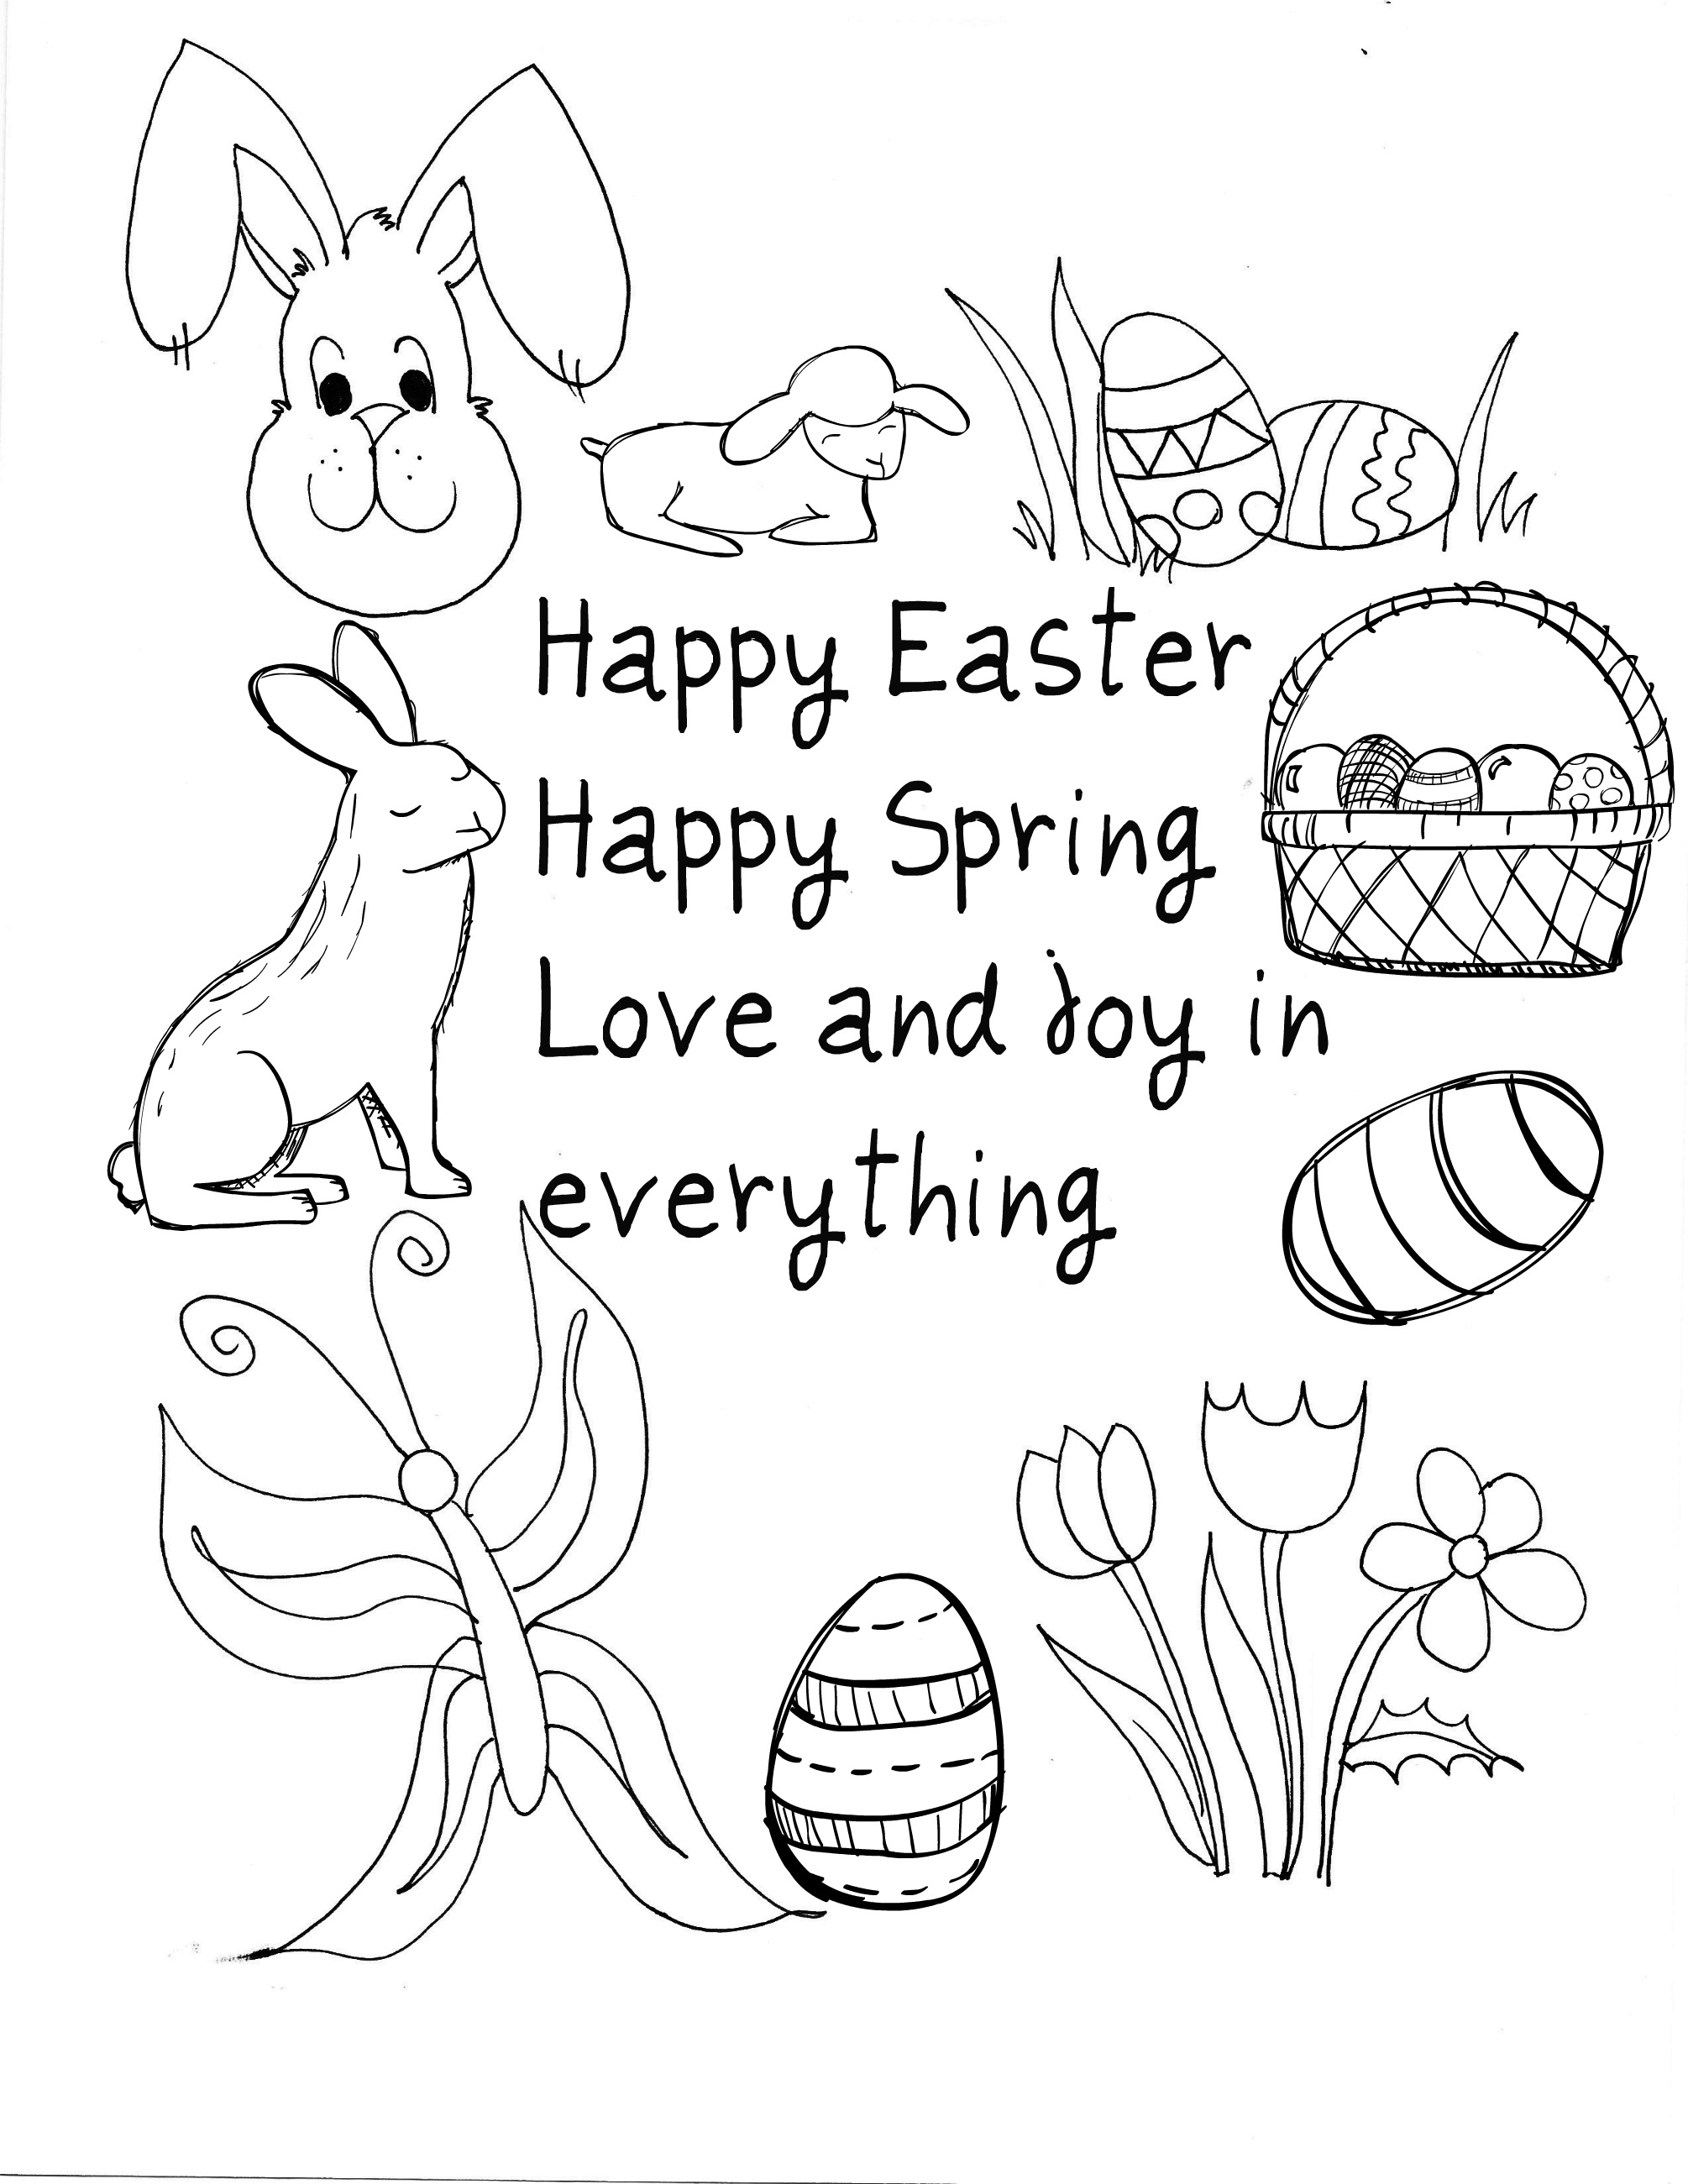 free-printable-easter-bunny-coloring-pages-for-kids-16-free-printable